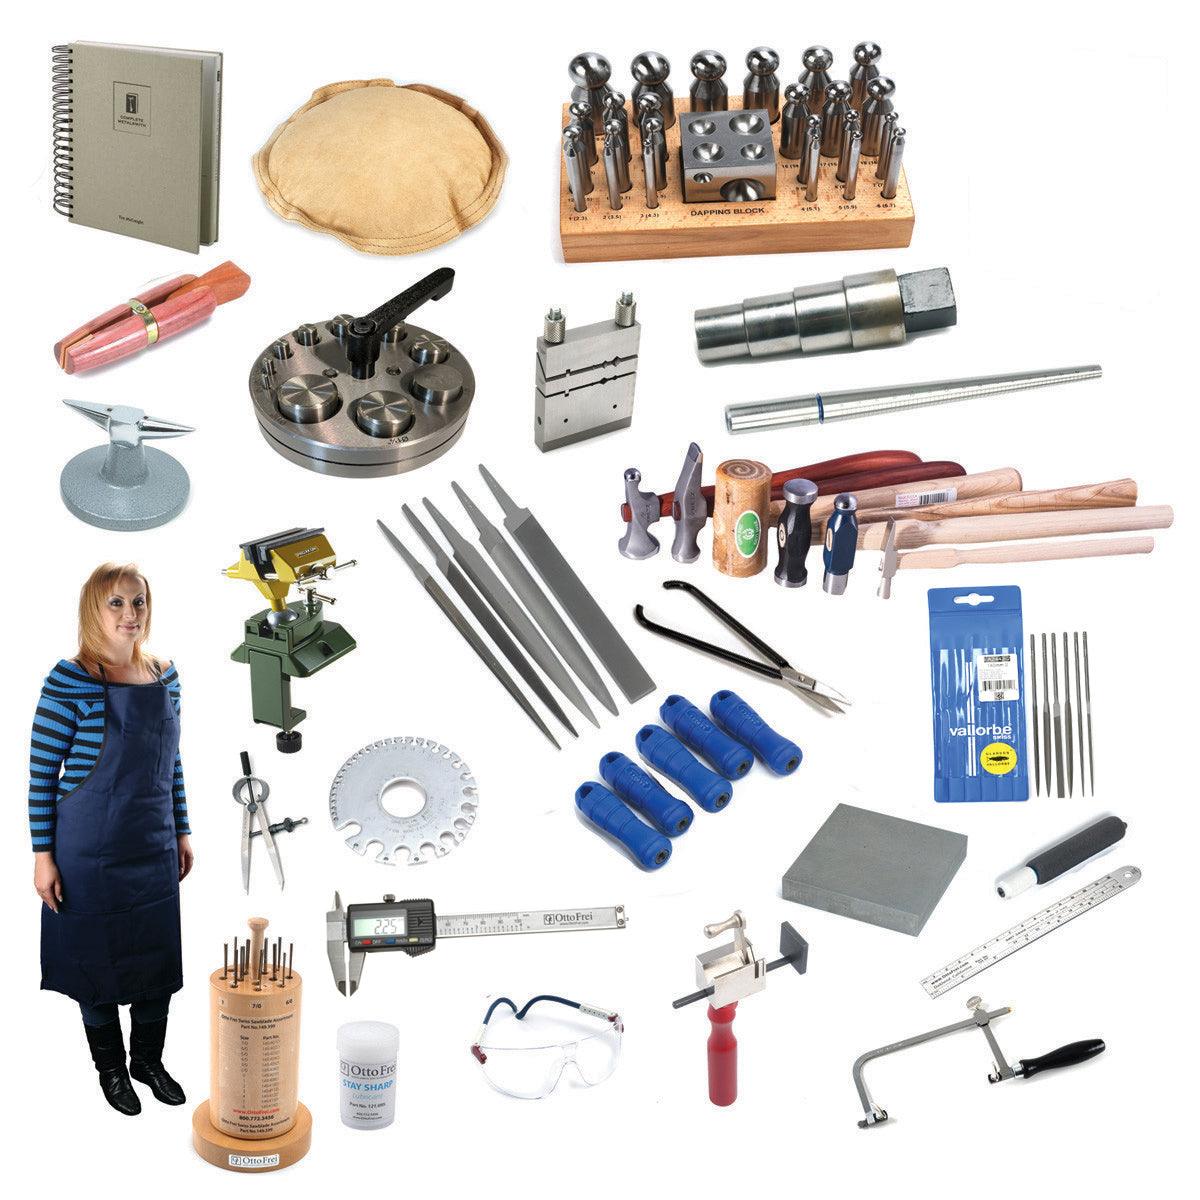 WHAT TOOLS TO BUY TO GET STARTED MAKING JEWELRY – Metalsmith Society